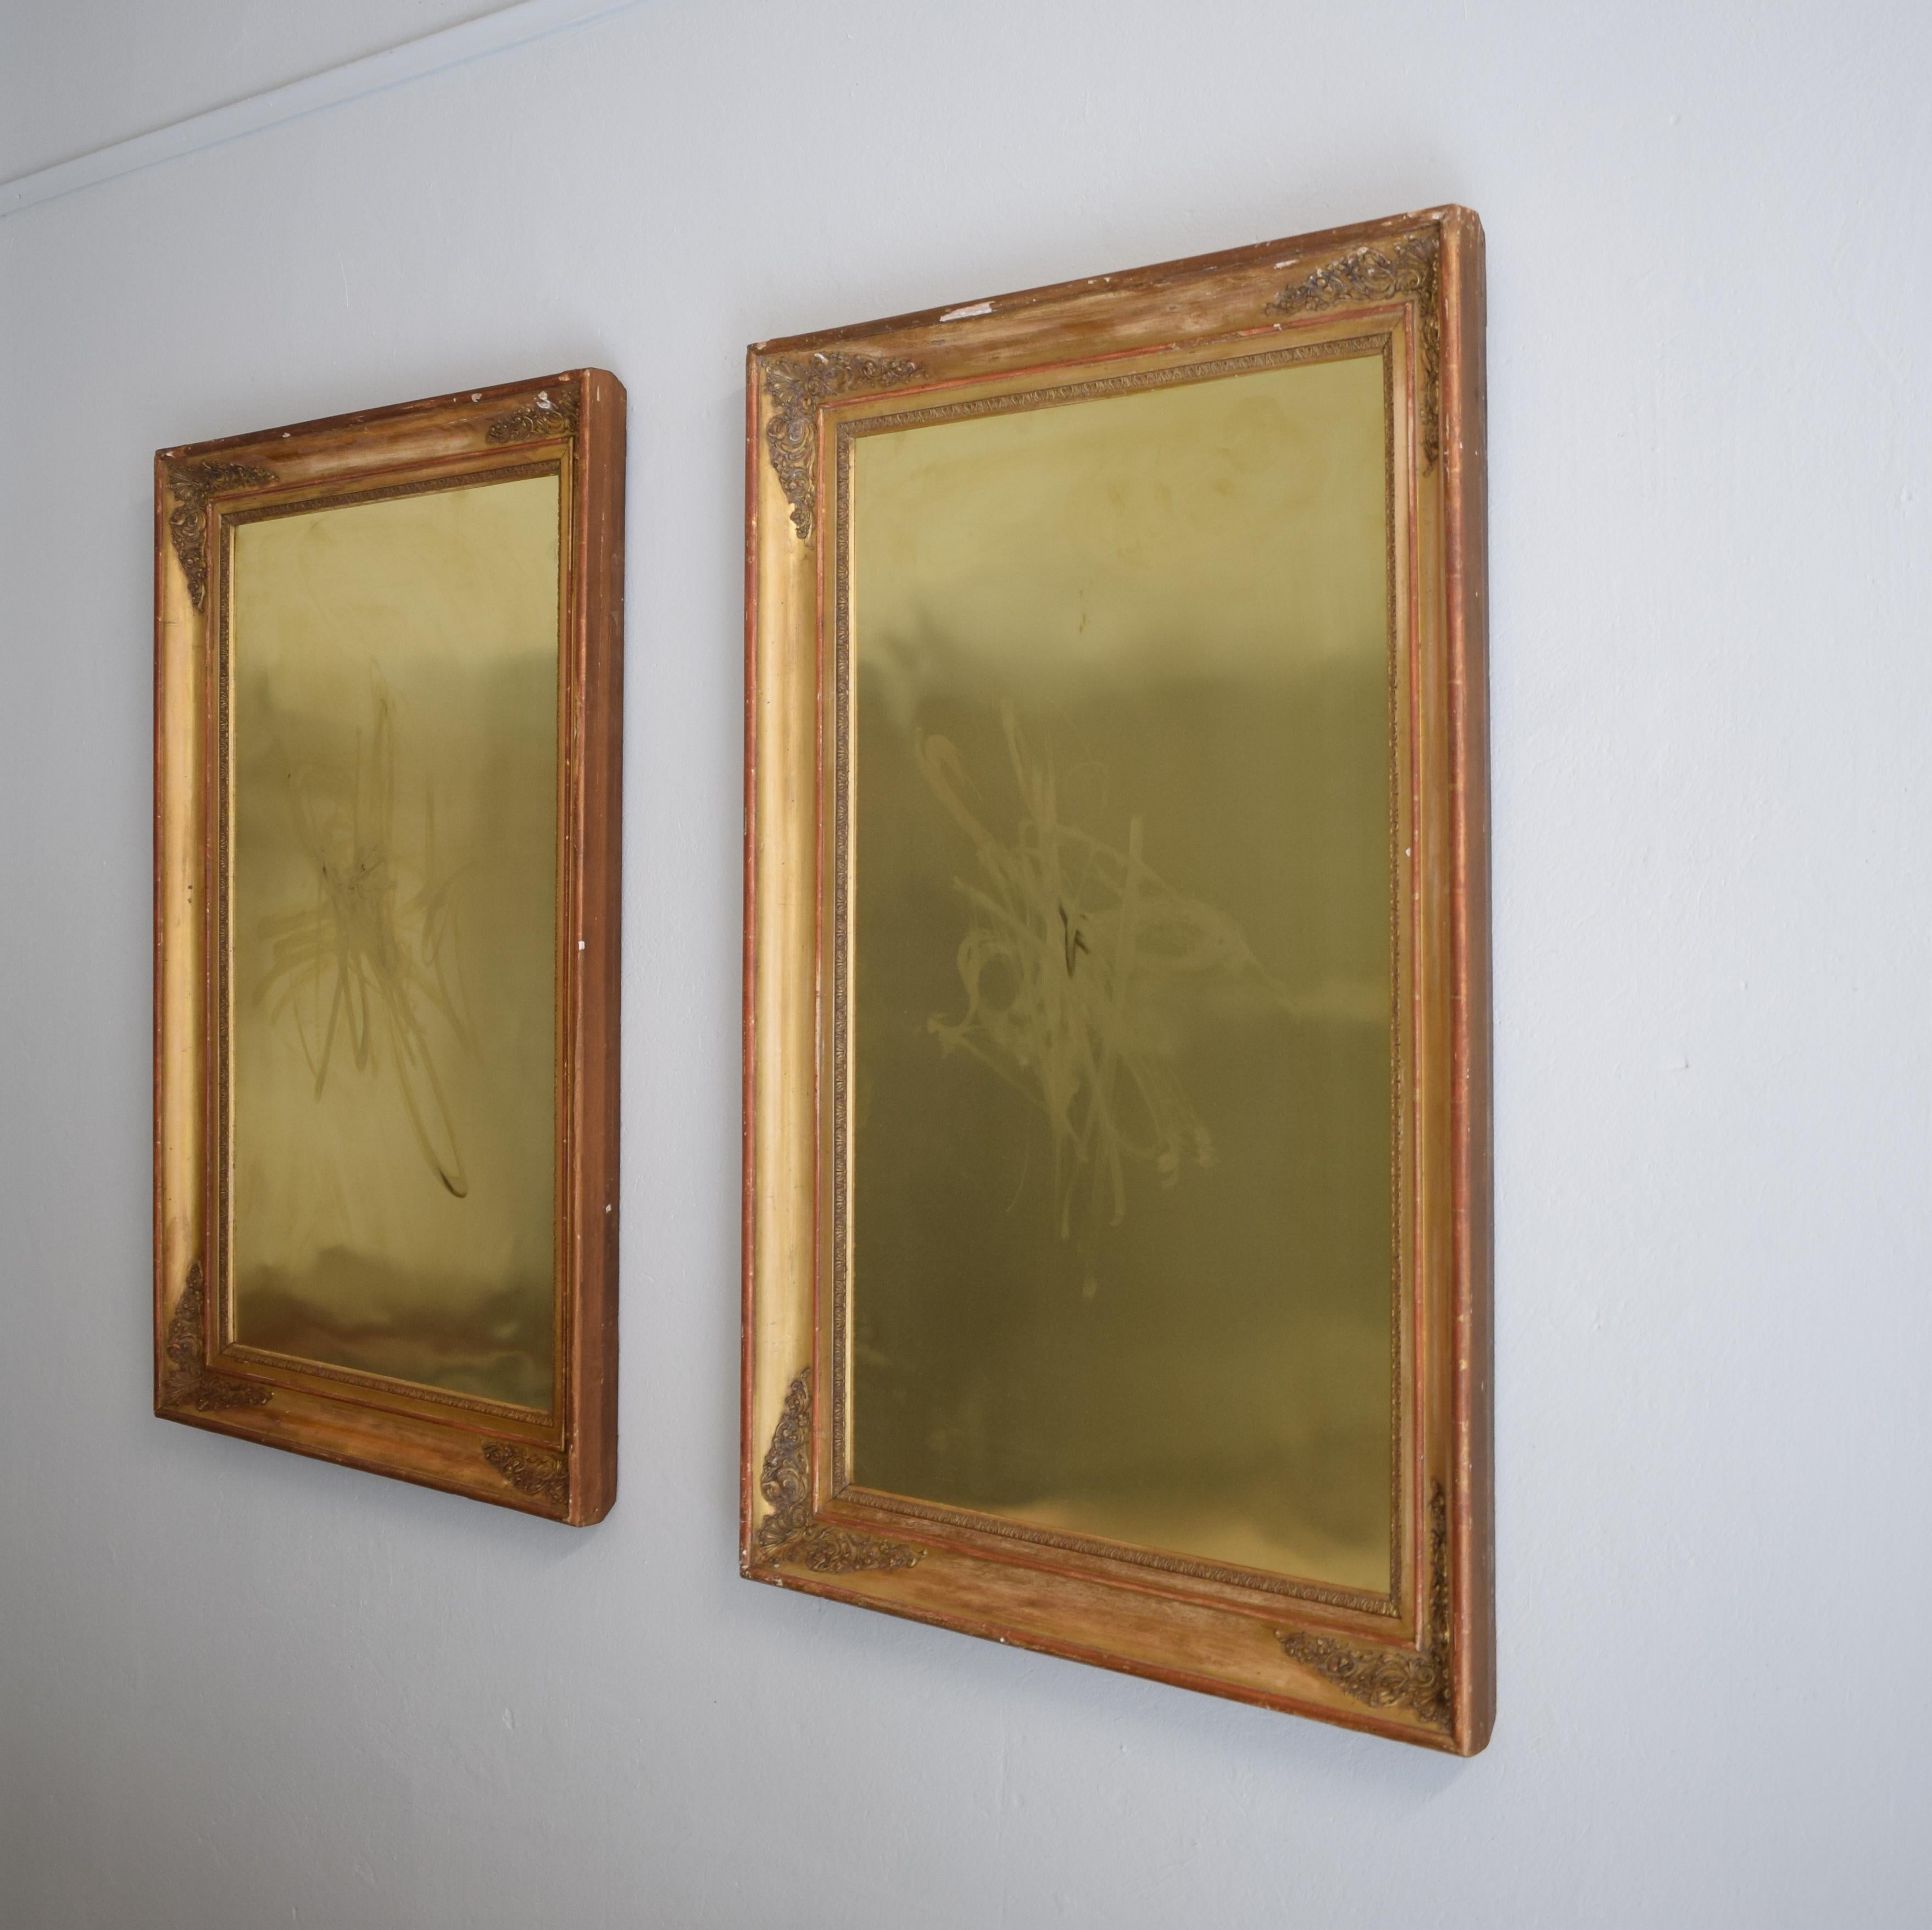  Abstract Modern Paintings on Brass Huge Pair of Late 19th Century Gilded Frames 5